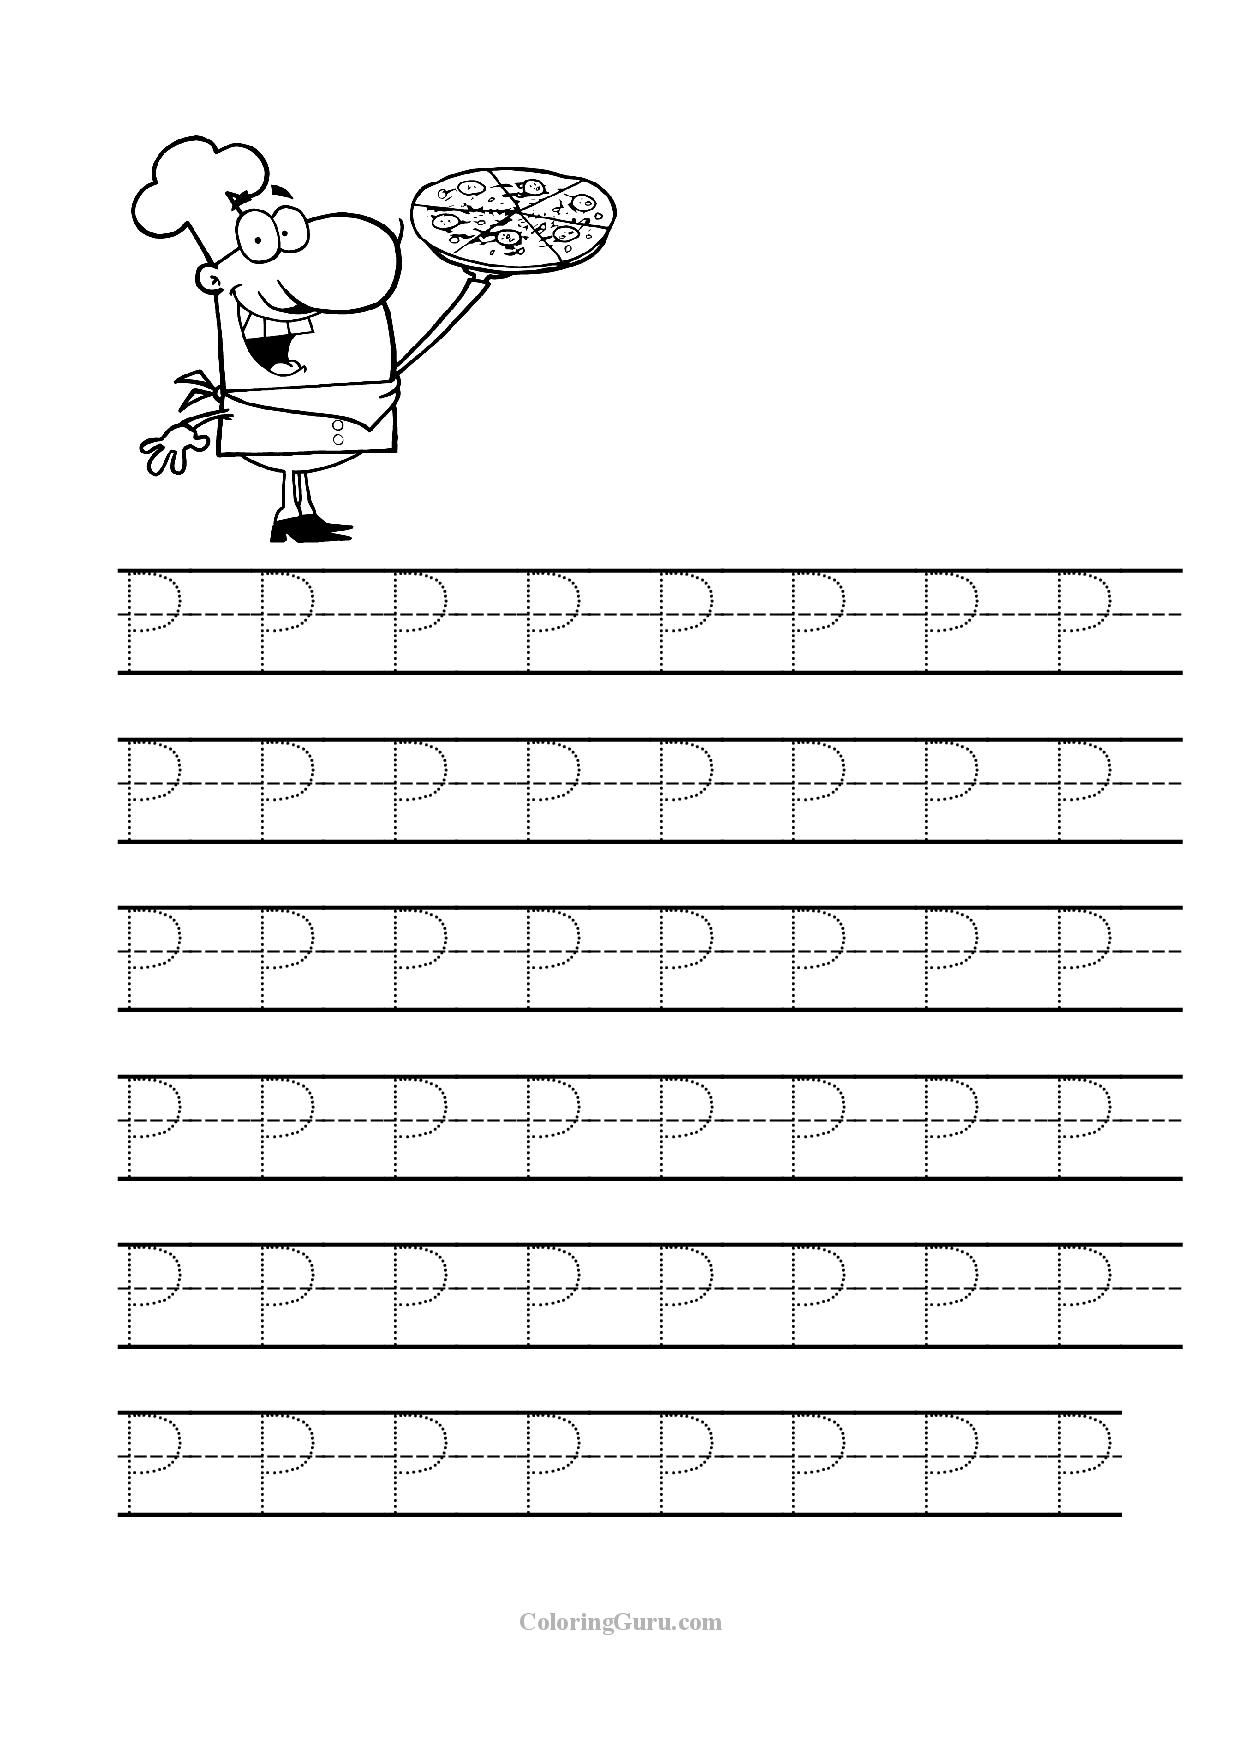 Free Printable Tracing Letter P Worksheets For Preschool | Tracing - Letter P Puzzle Printable